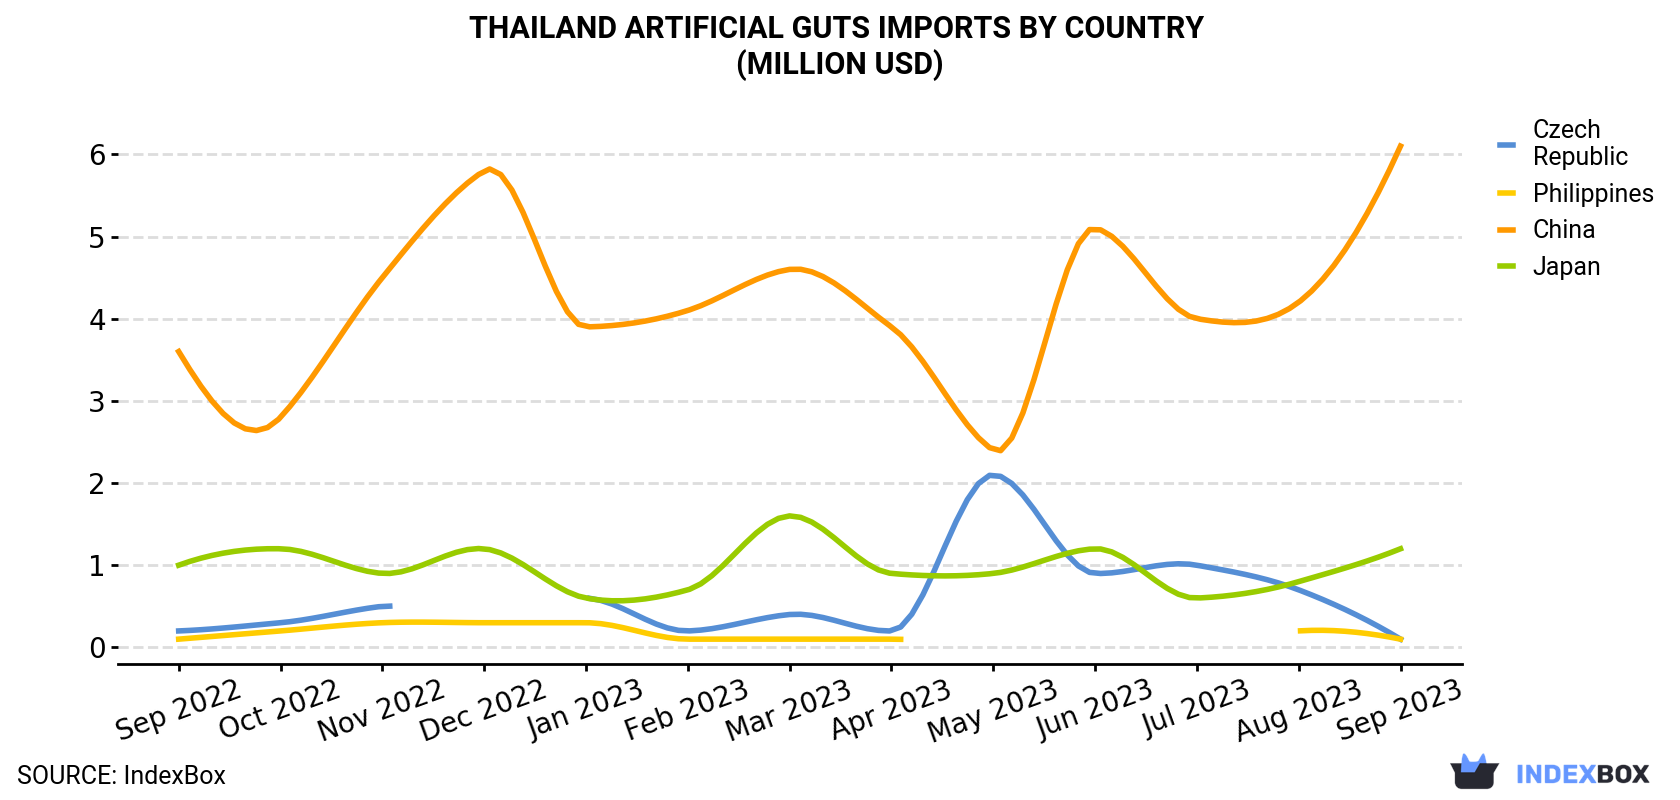 Thailand Artificial Guts Imports By Country (Million USD)